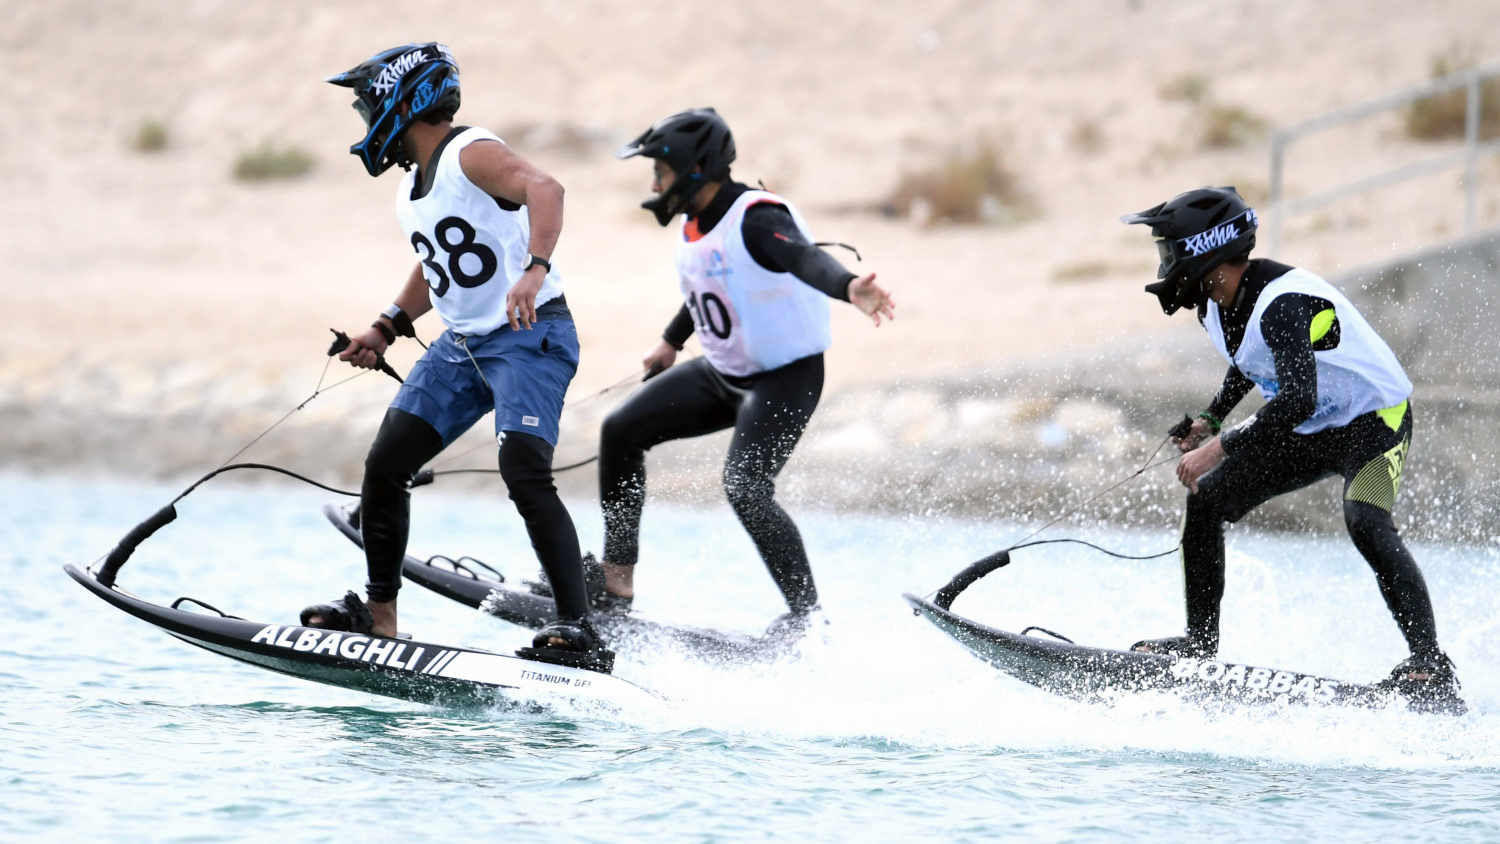 Motosurf Racing Is The Coolest Extreme Sport You've Likely Never Heard Of